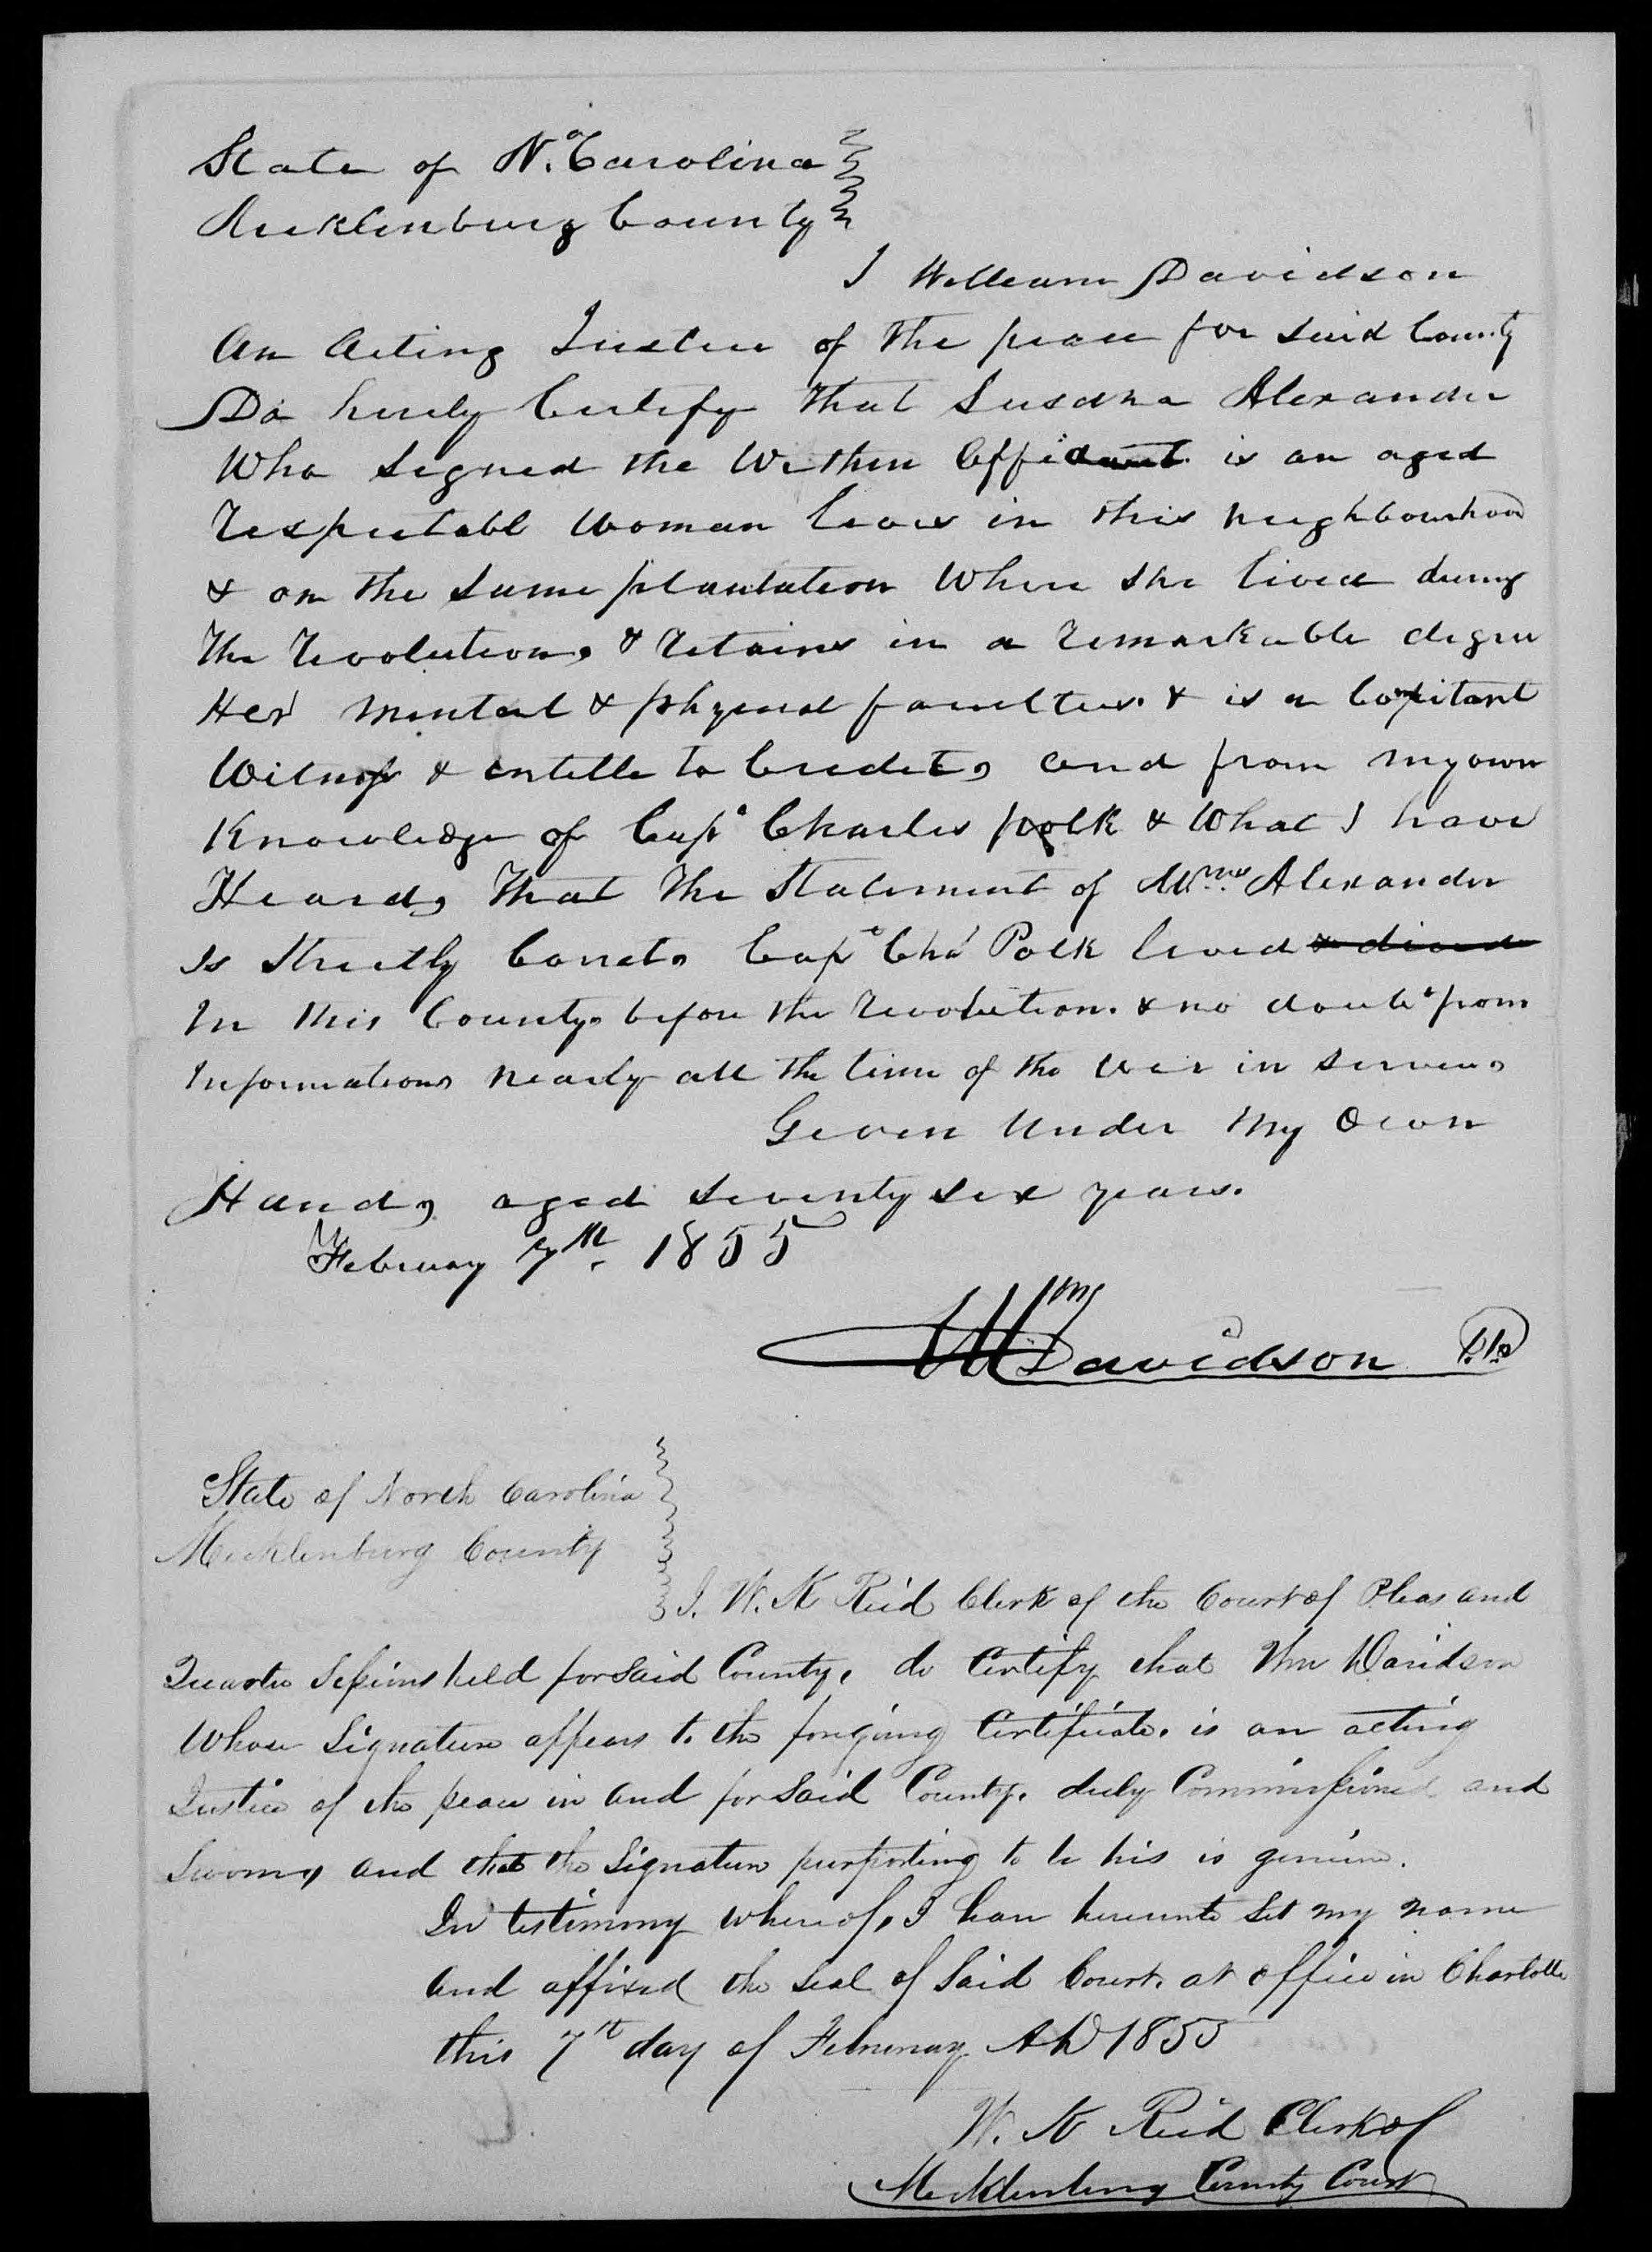 Affidavit of Susana Alexander in support of a Pension Claim for Charles Polk, 7 February 1855, page 2